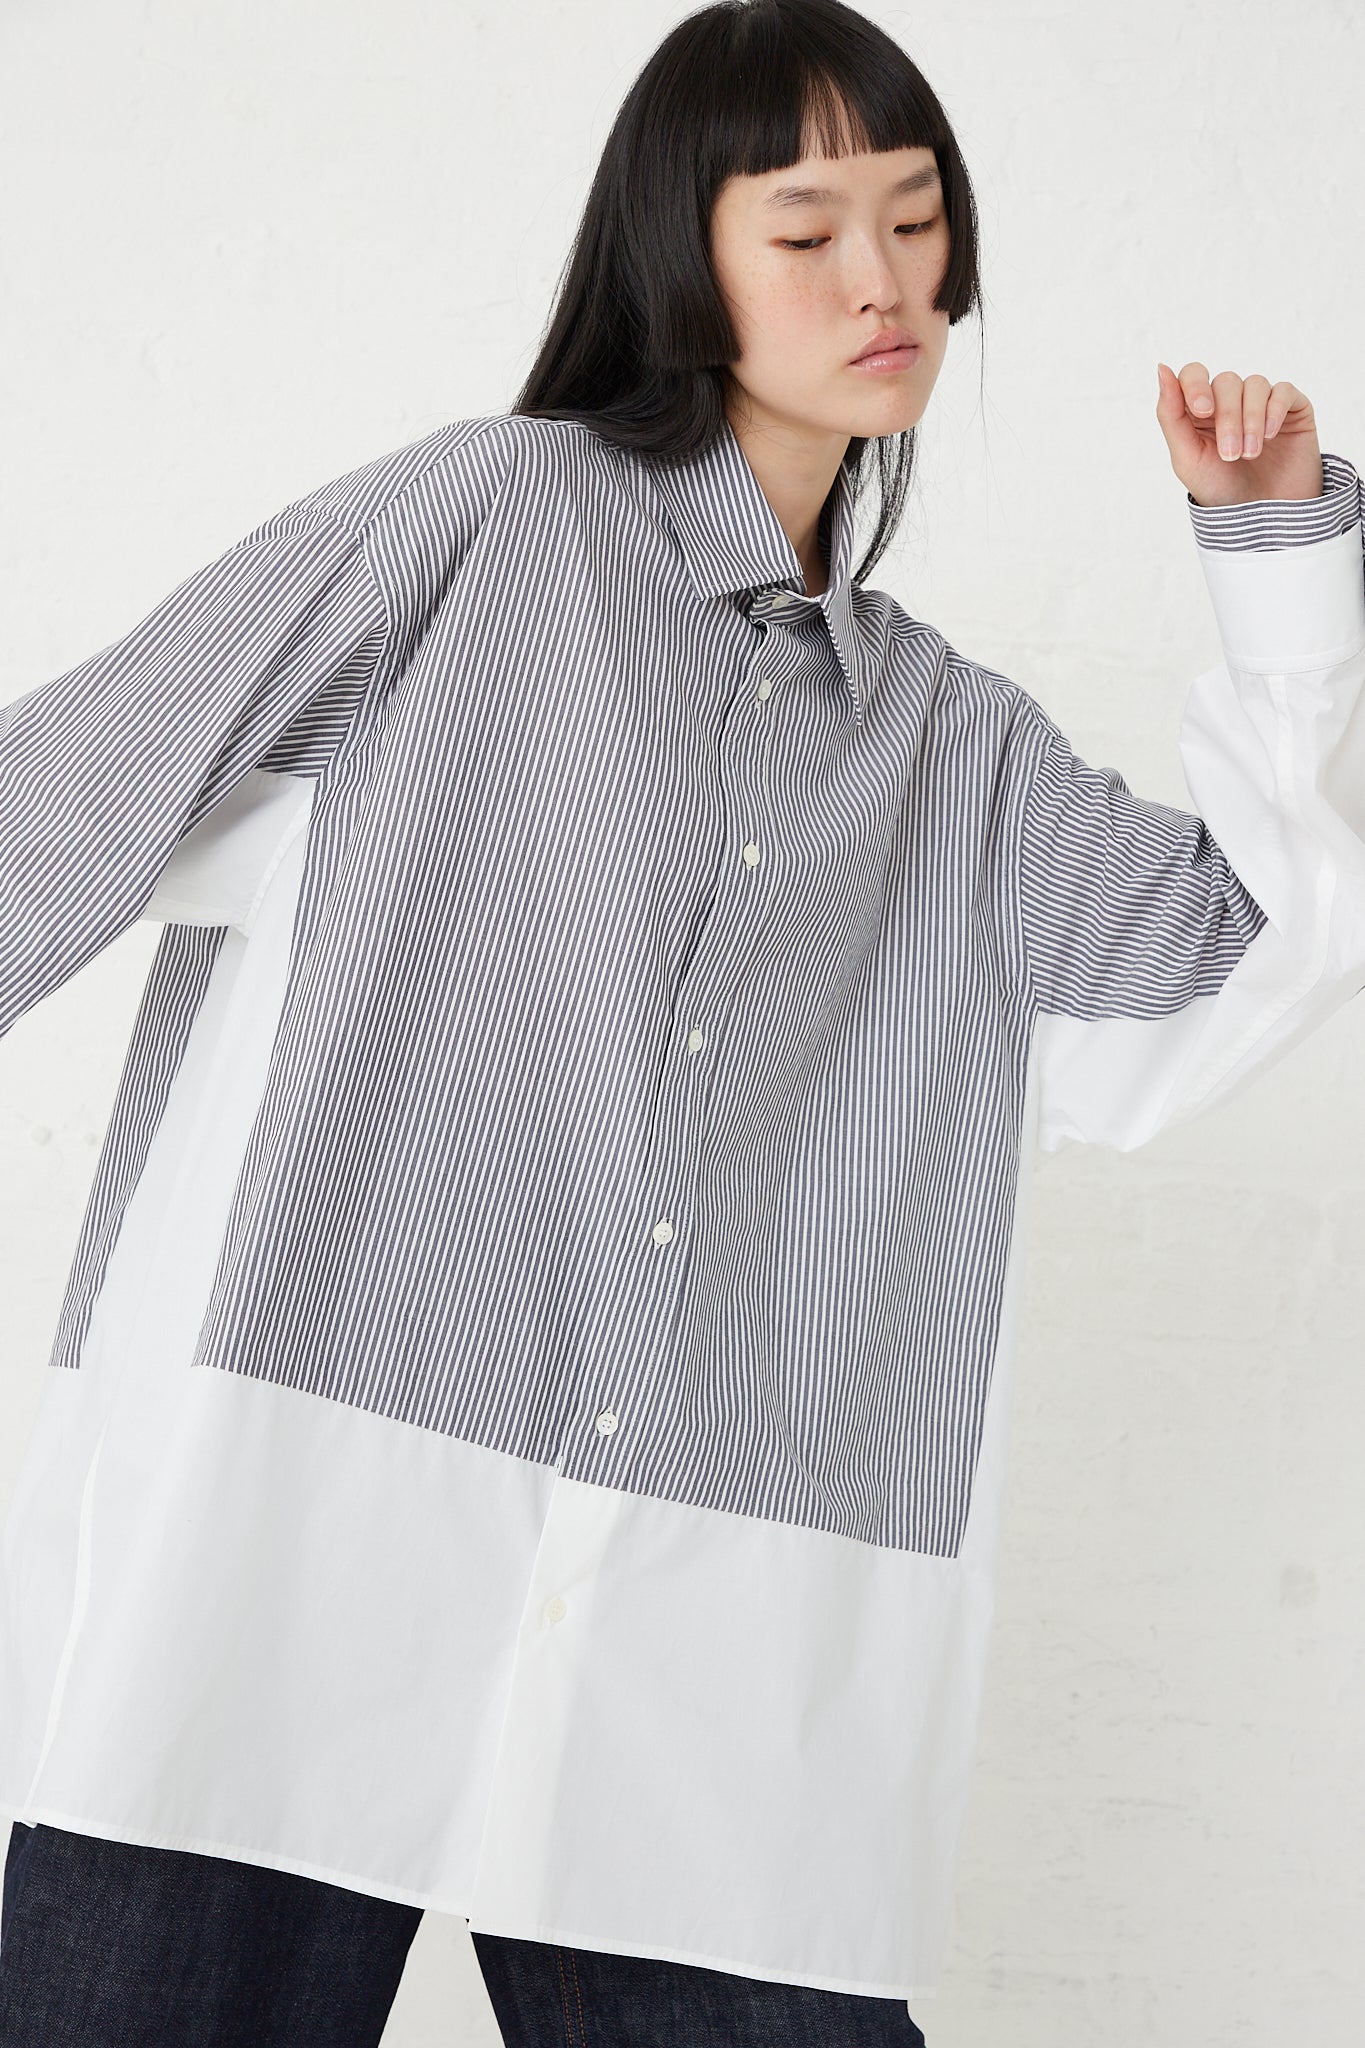 The model is wearing an MM6 Cotton Long Sleeved Shirt in Dark Grey and White.